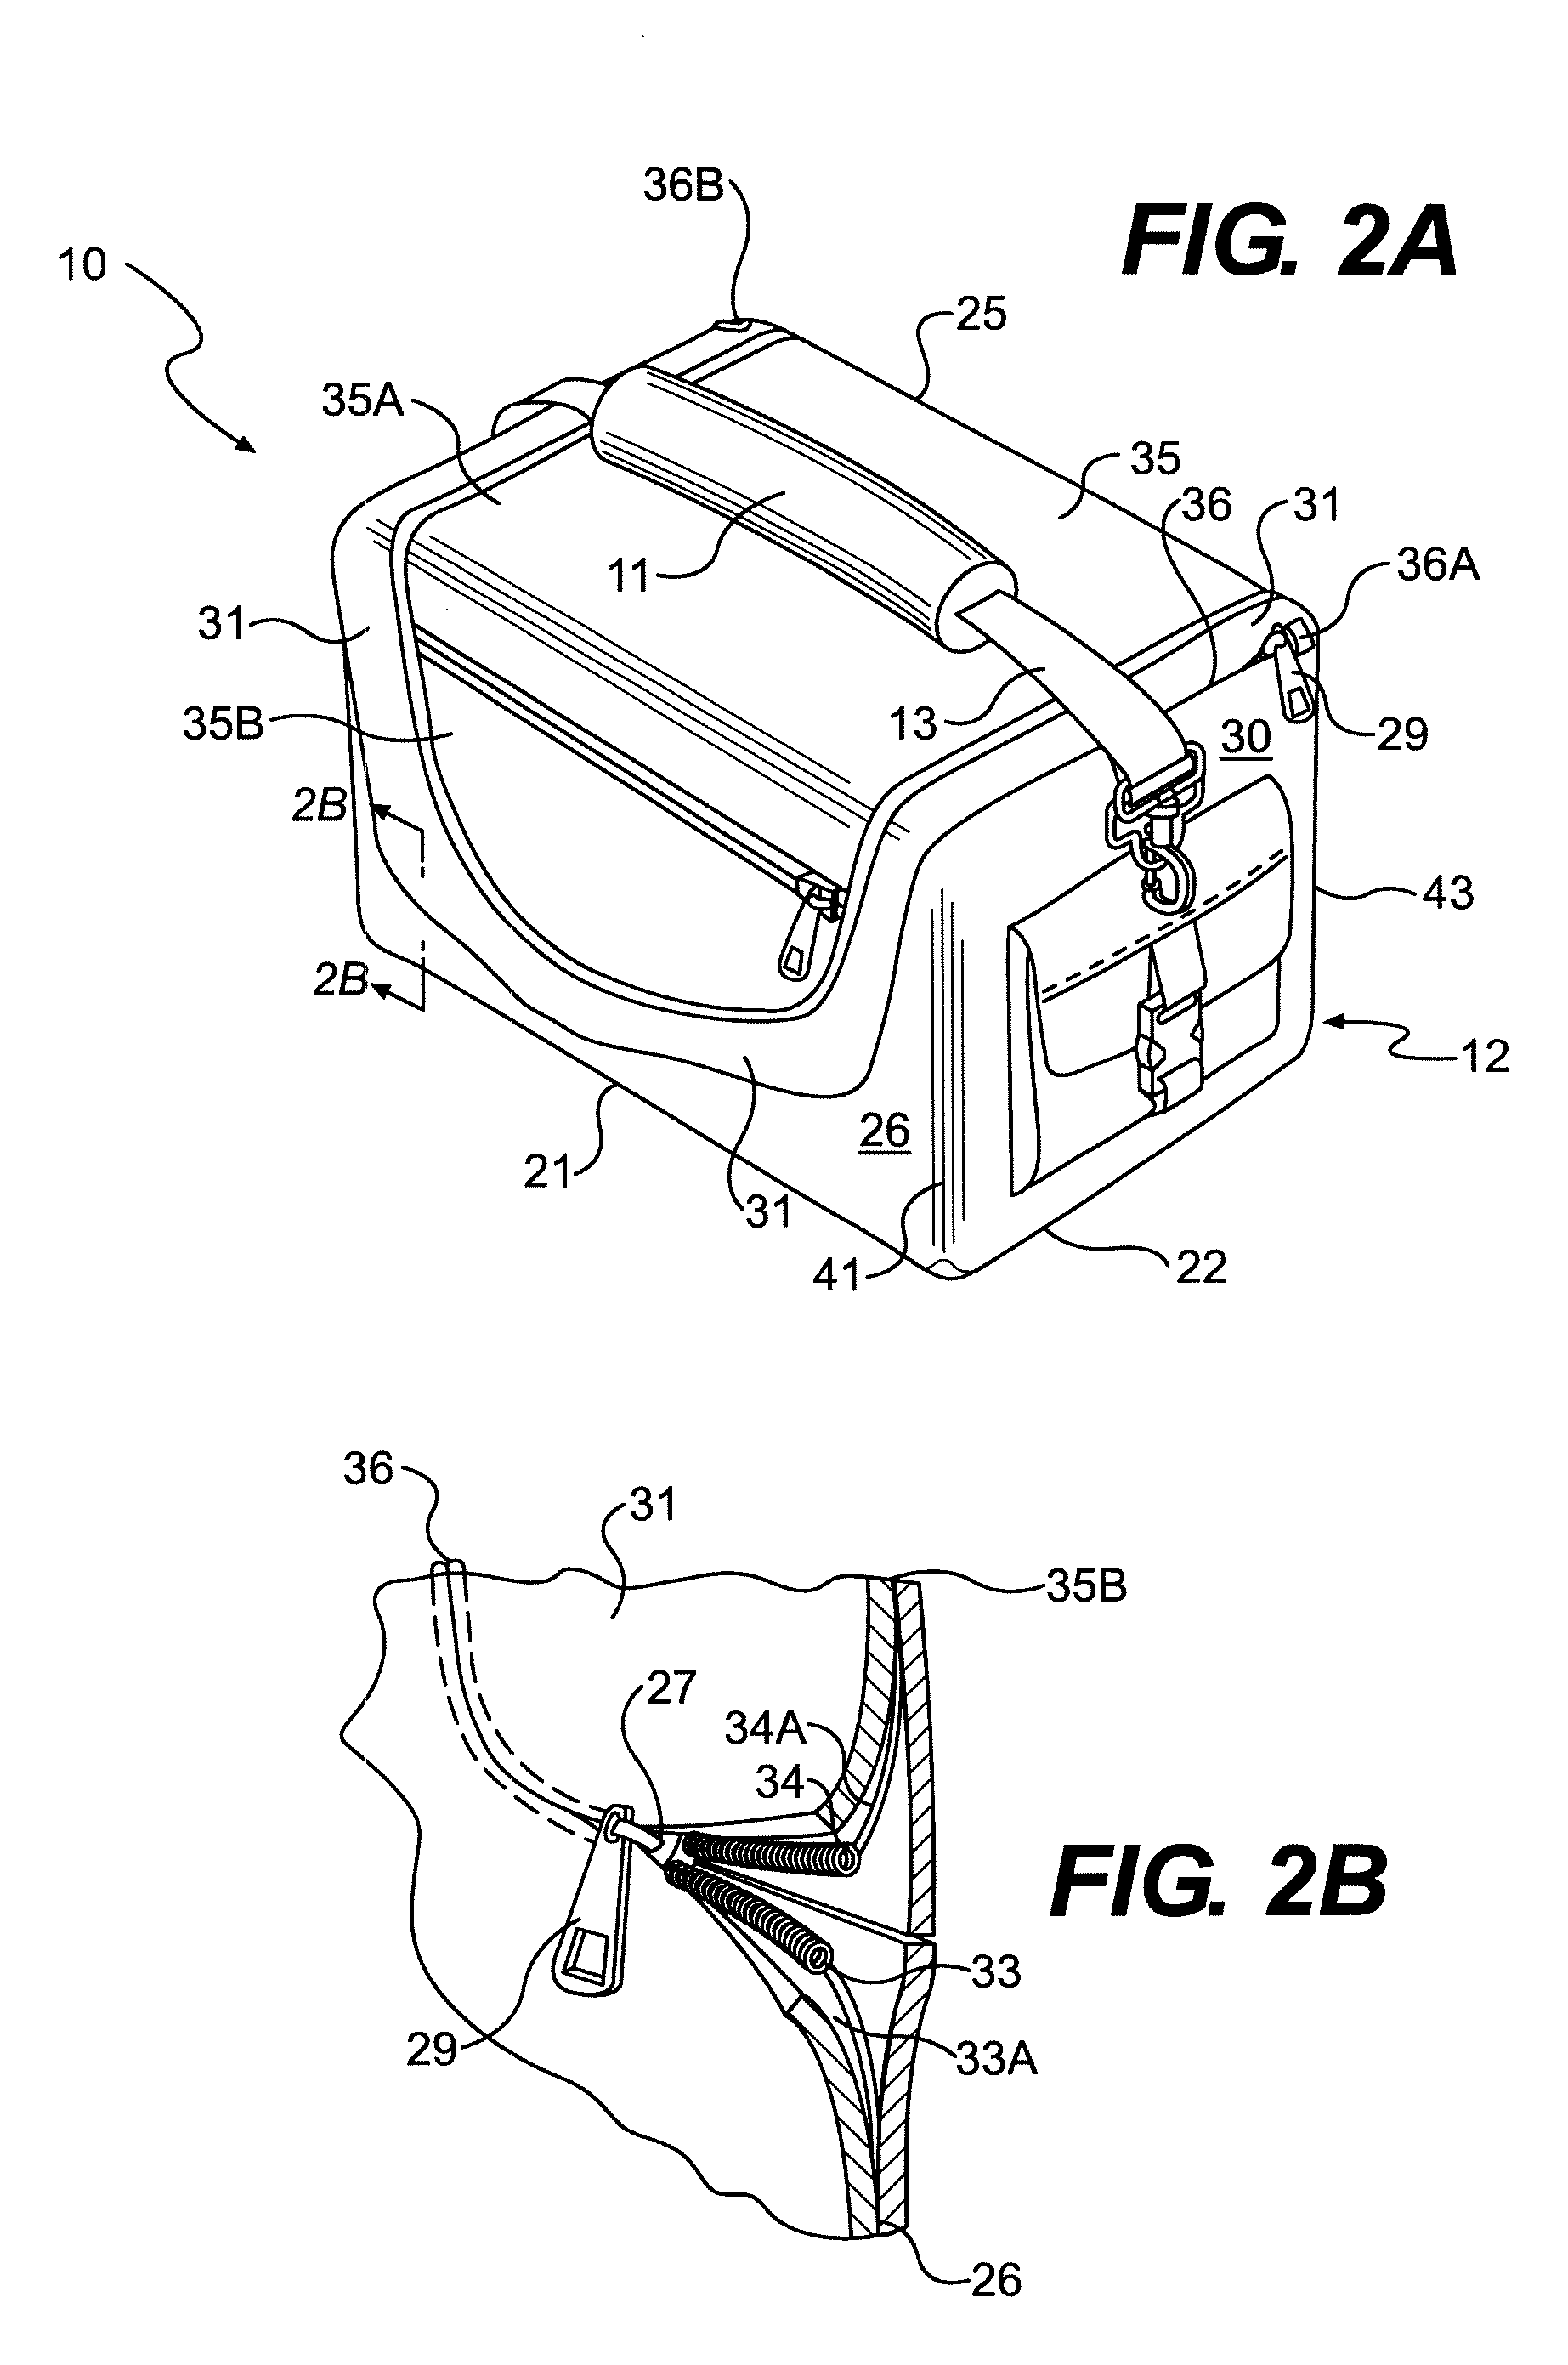 Portable battery jump start in a soft-sided carrying case